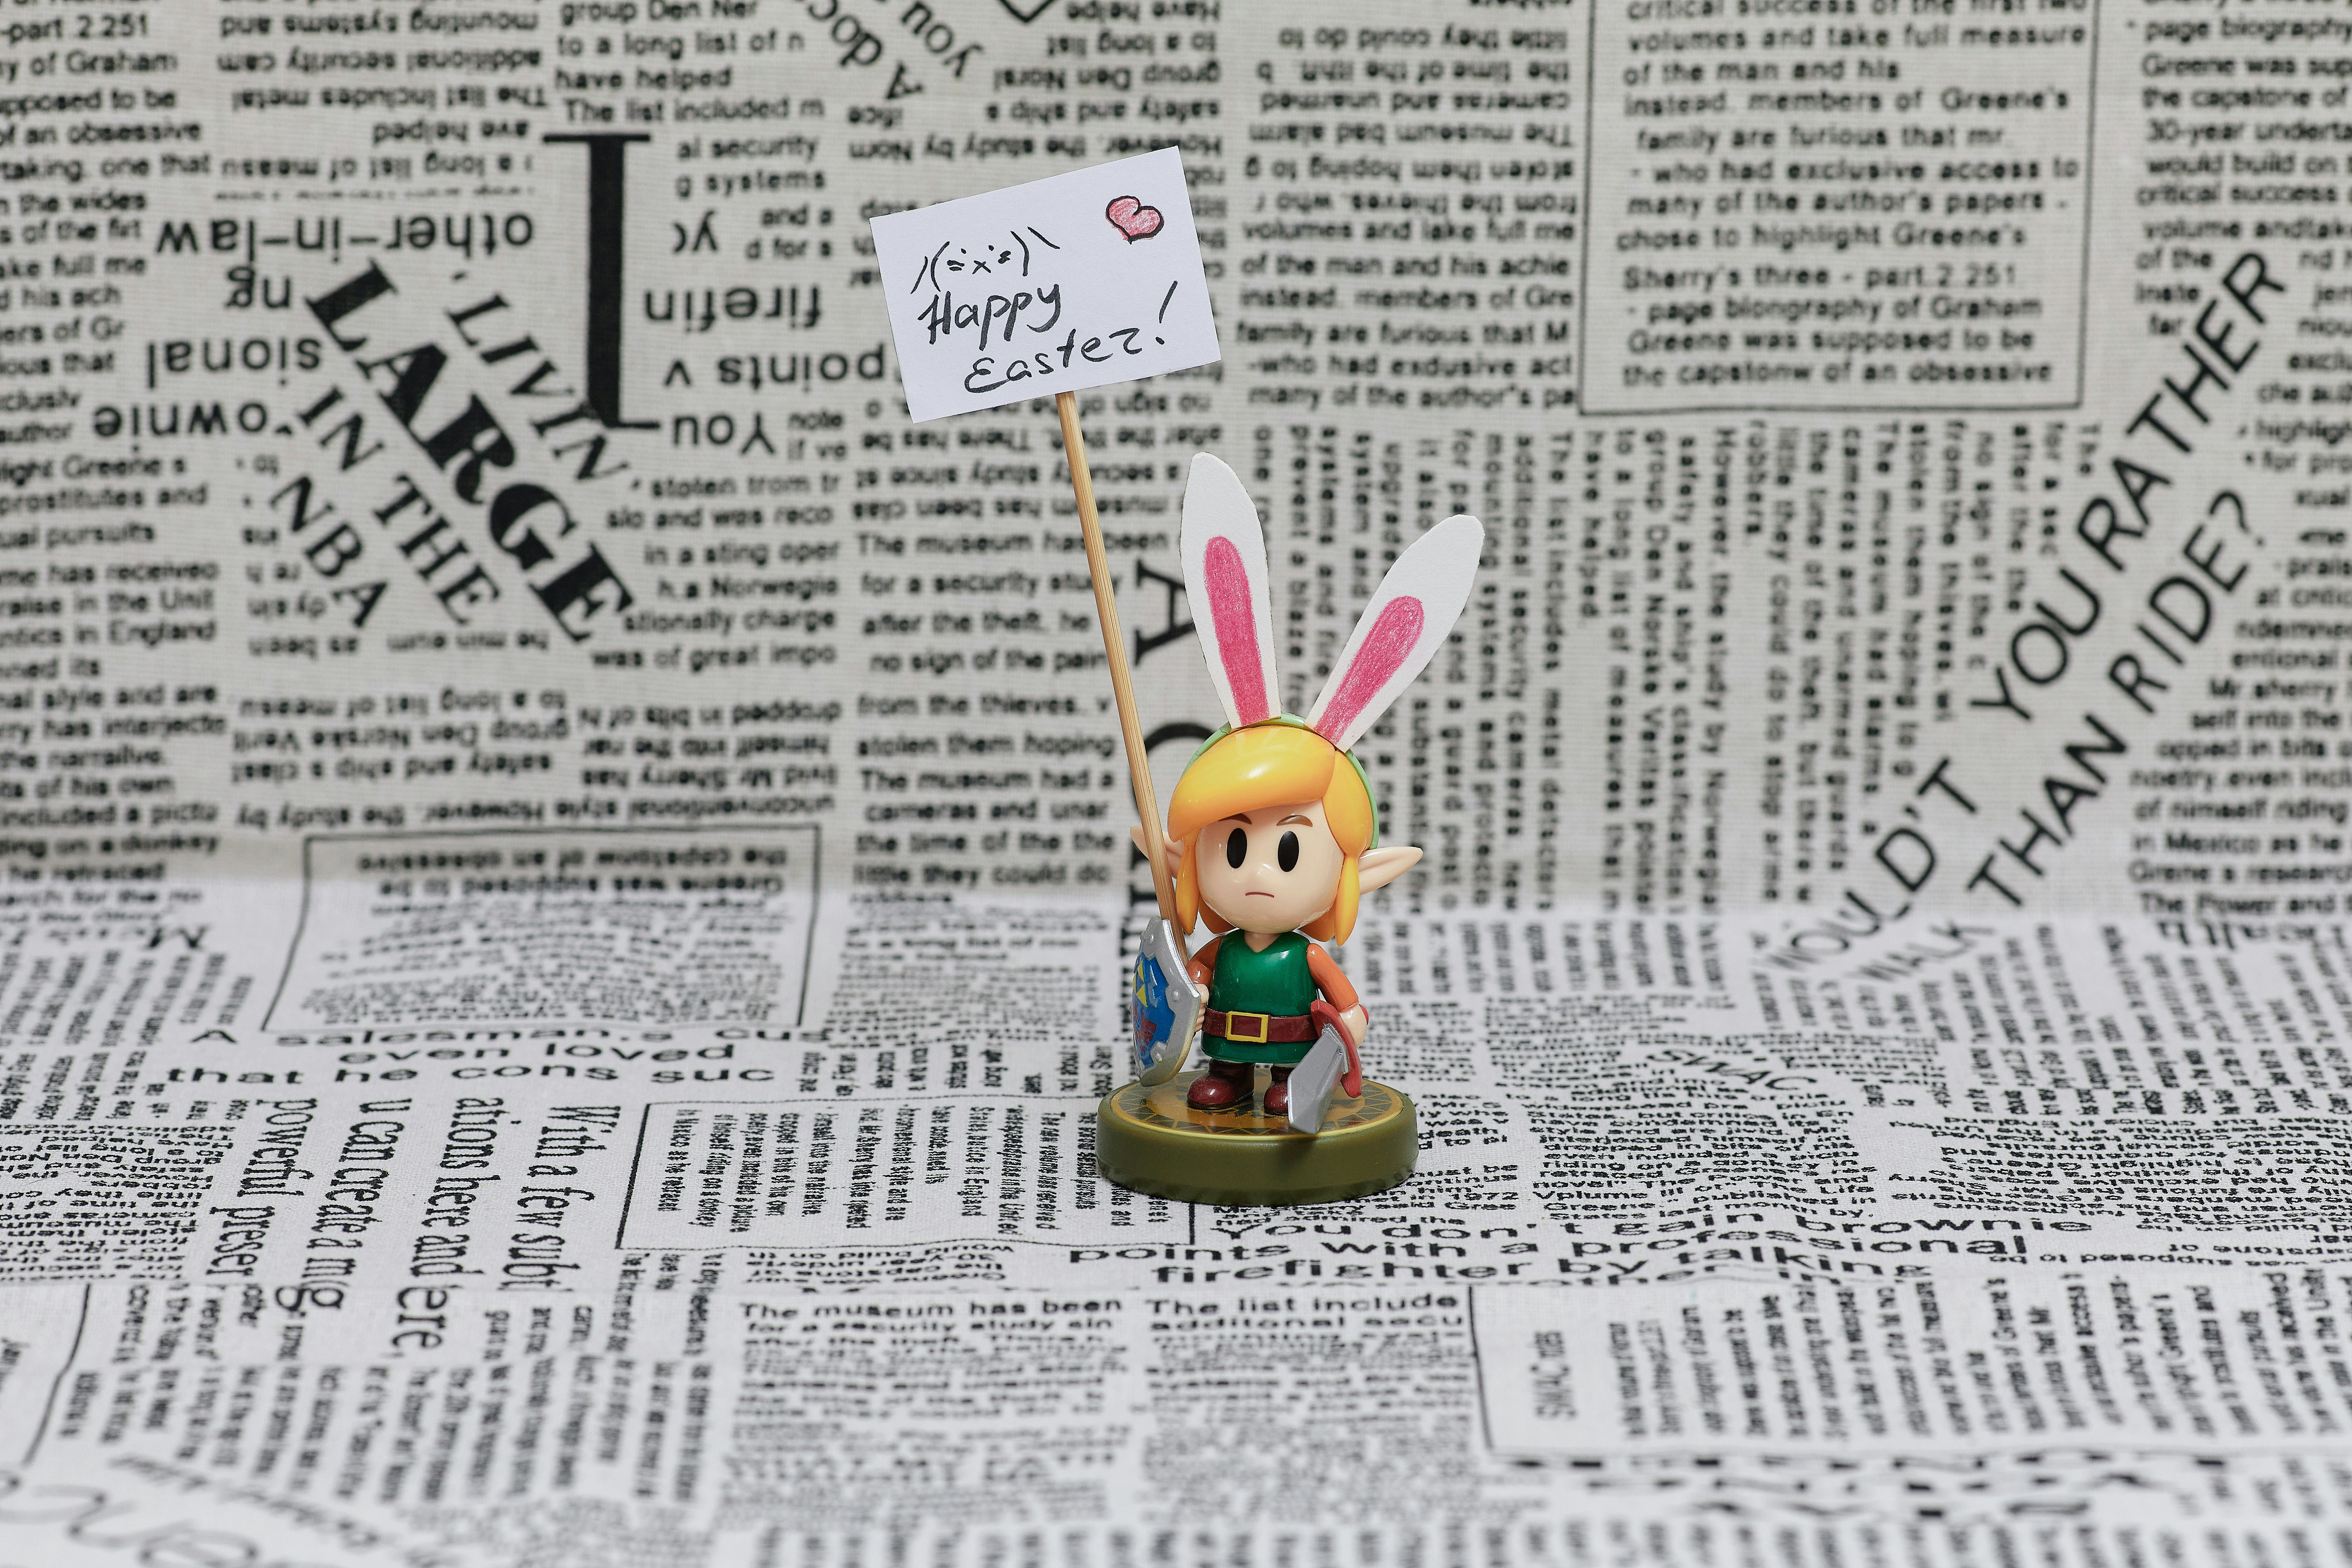 The character from the game (Link) on a newspaper background with a tablet in his hands. The plaque says \